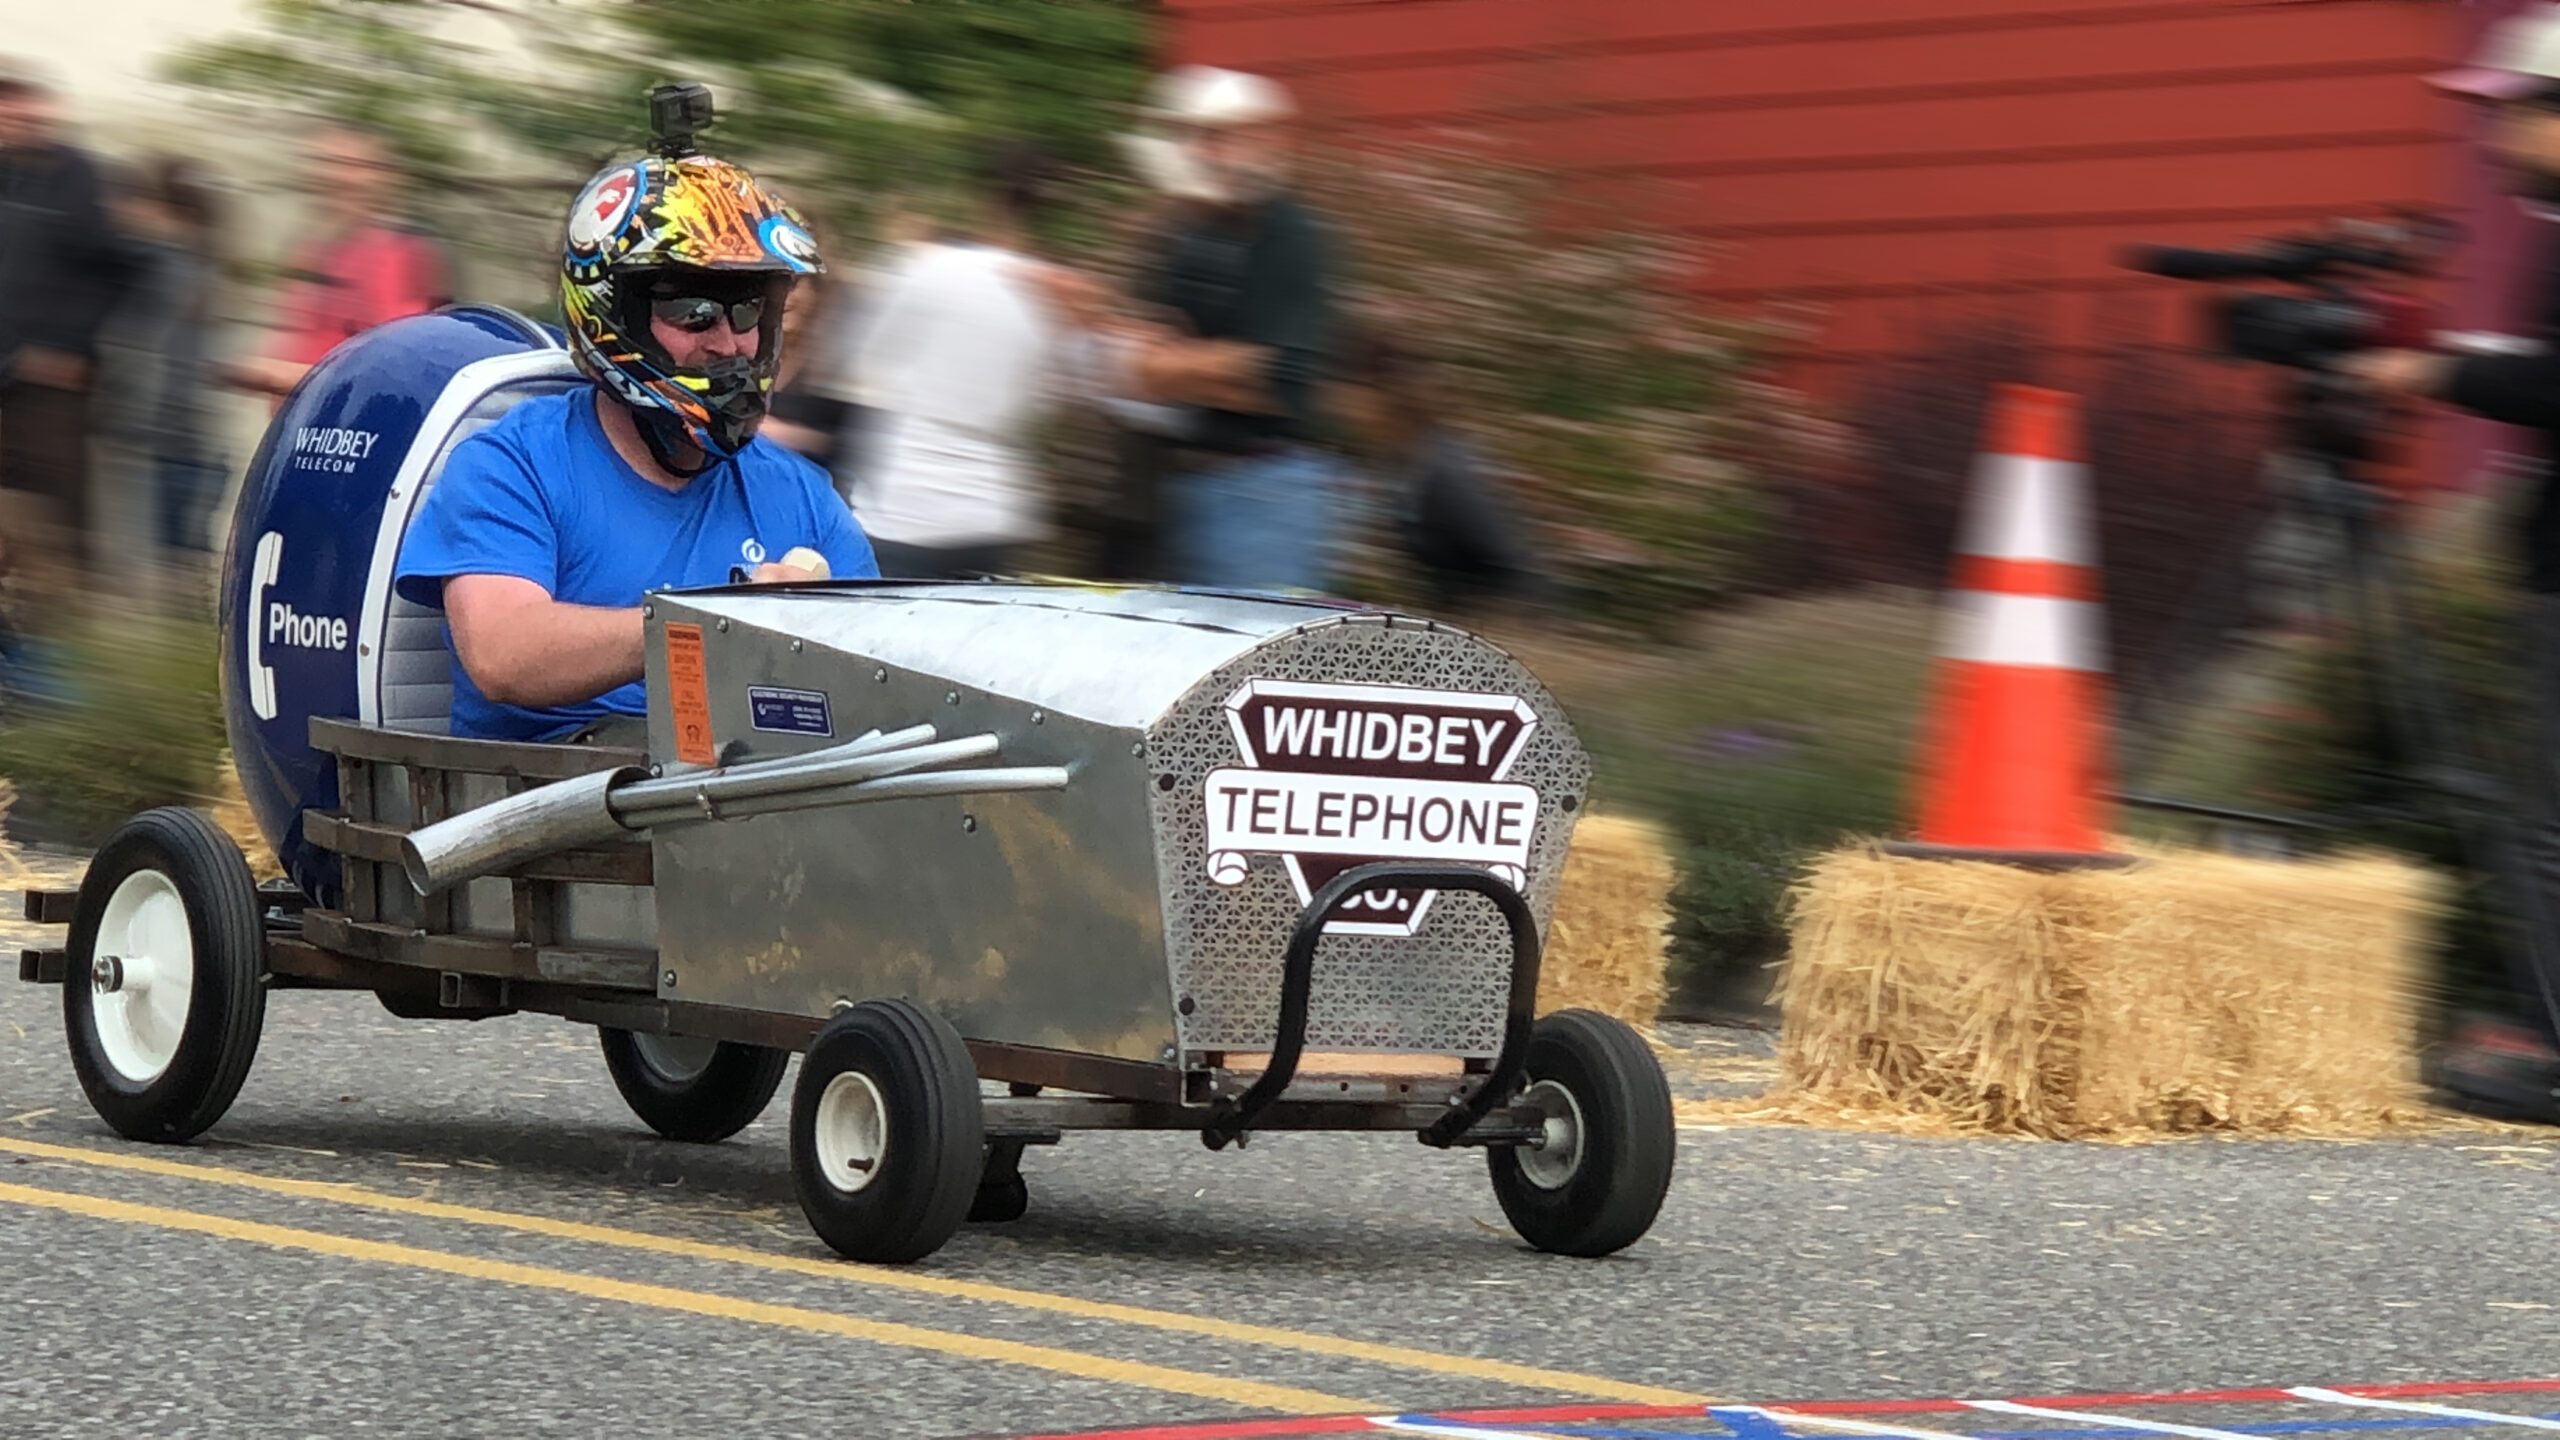 Whidbey Telecom fun careers soup box derby